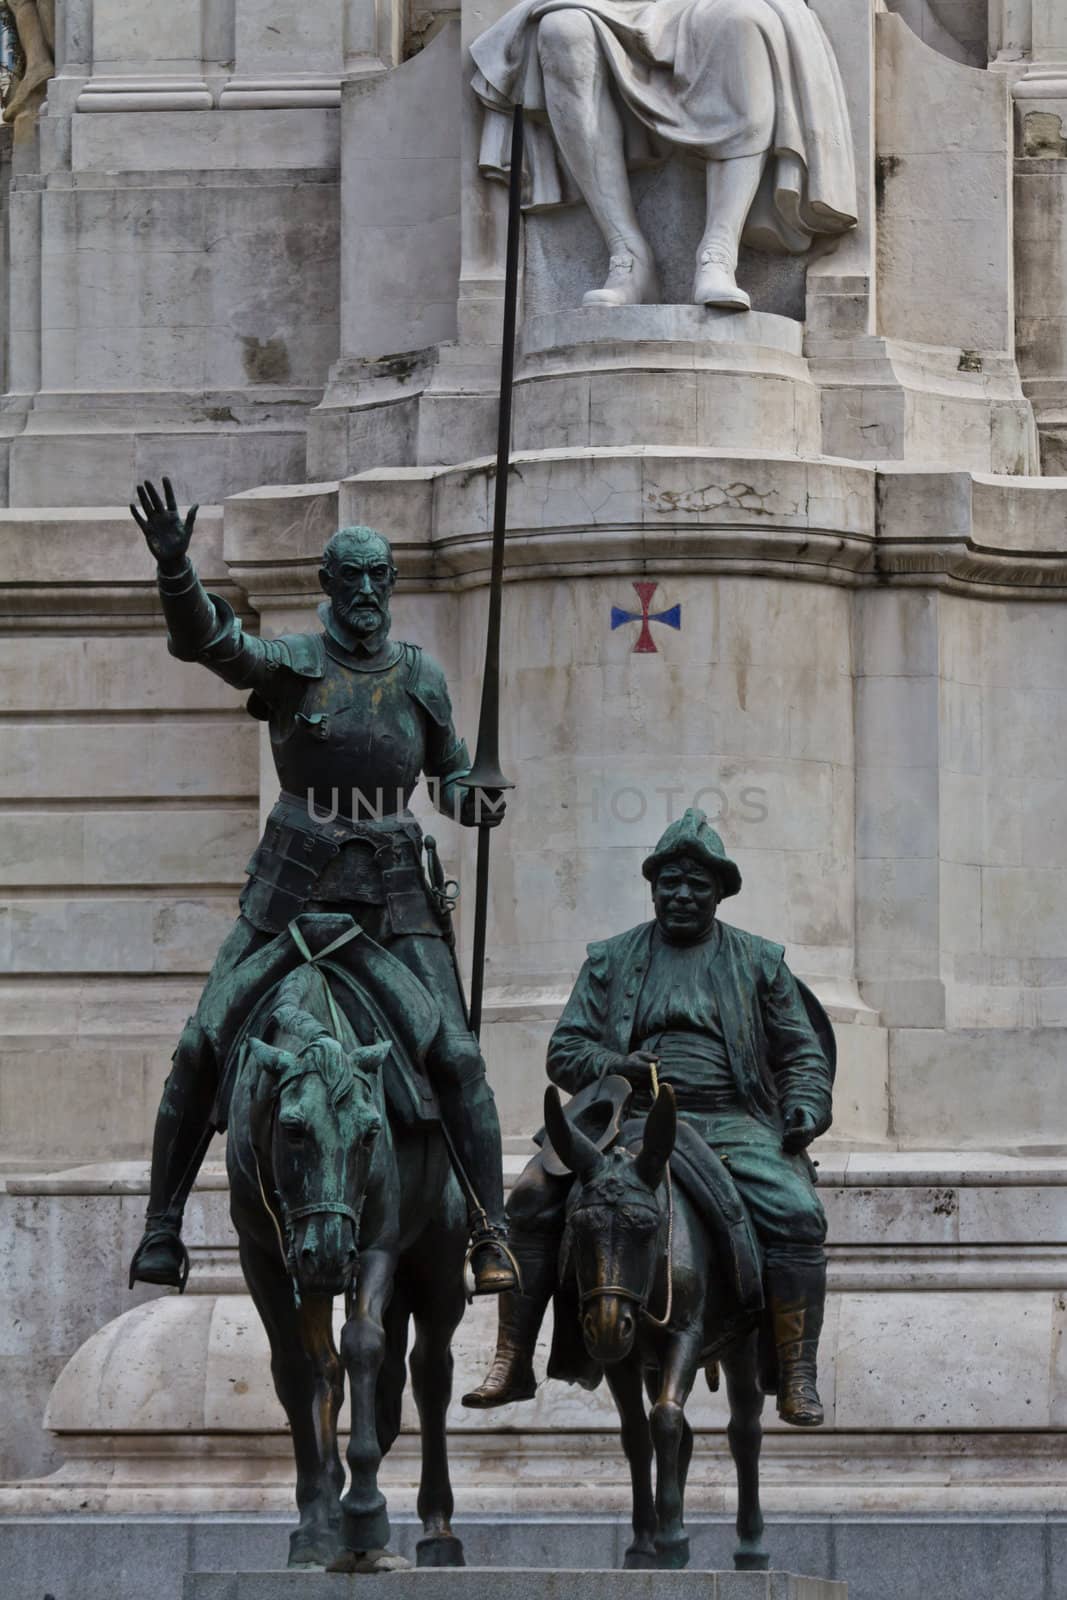 The famous monument of Cervantes' figures Don Quijote and Sancho Panza in Madrid (Spain Square)